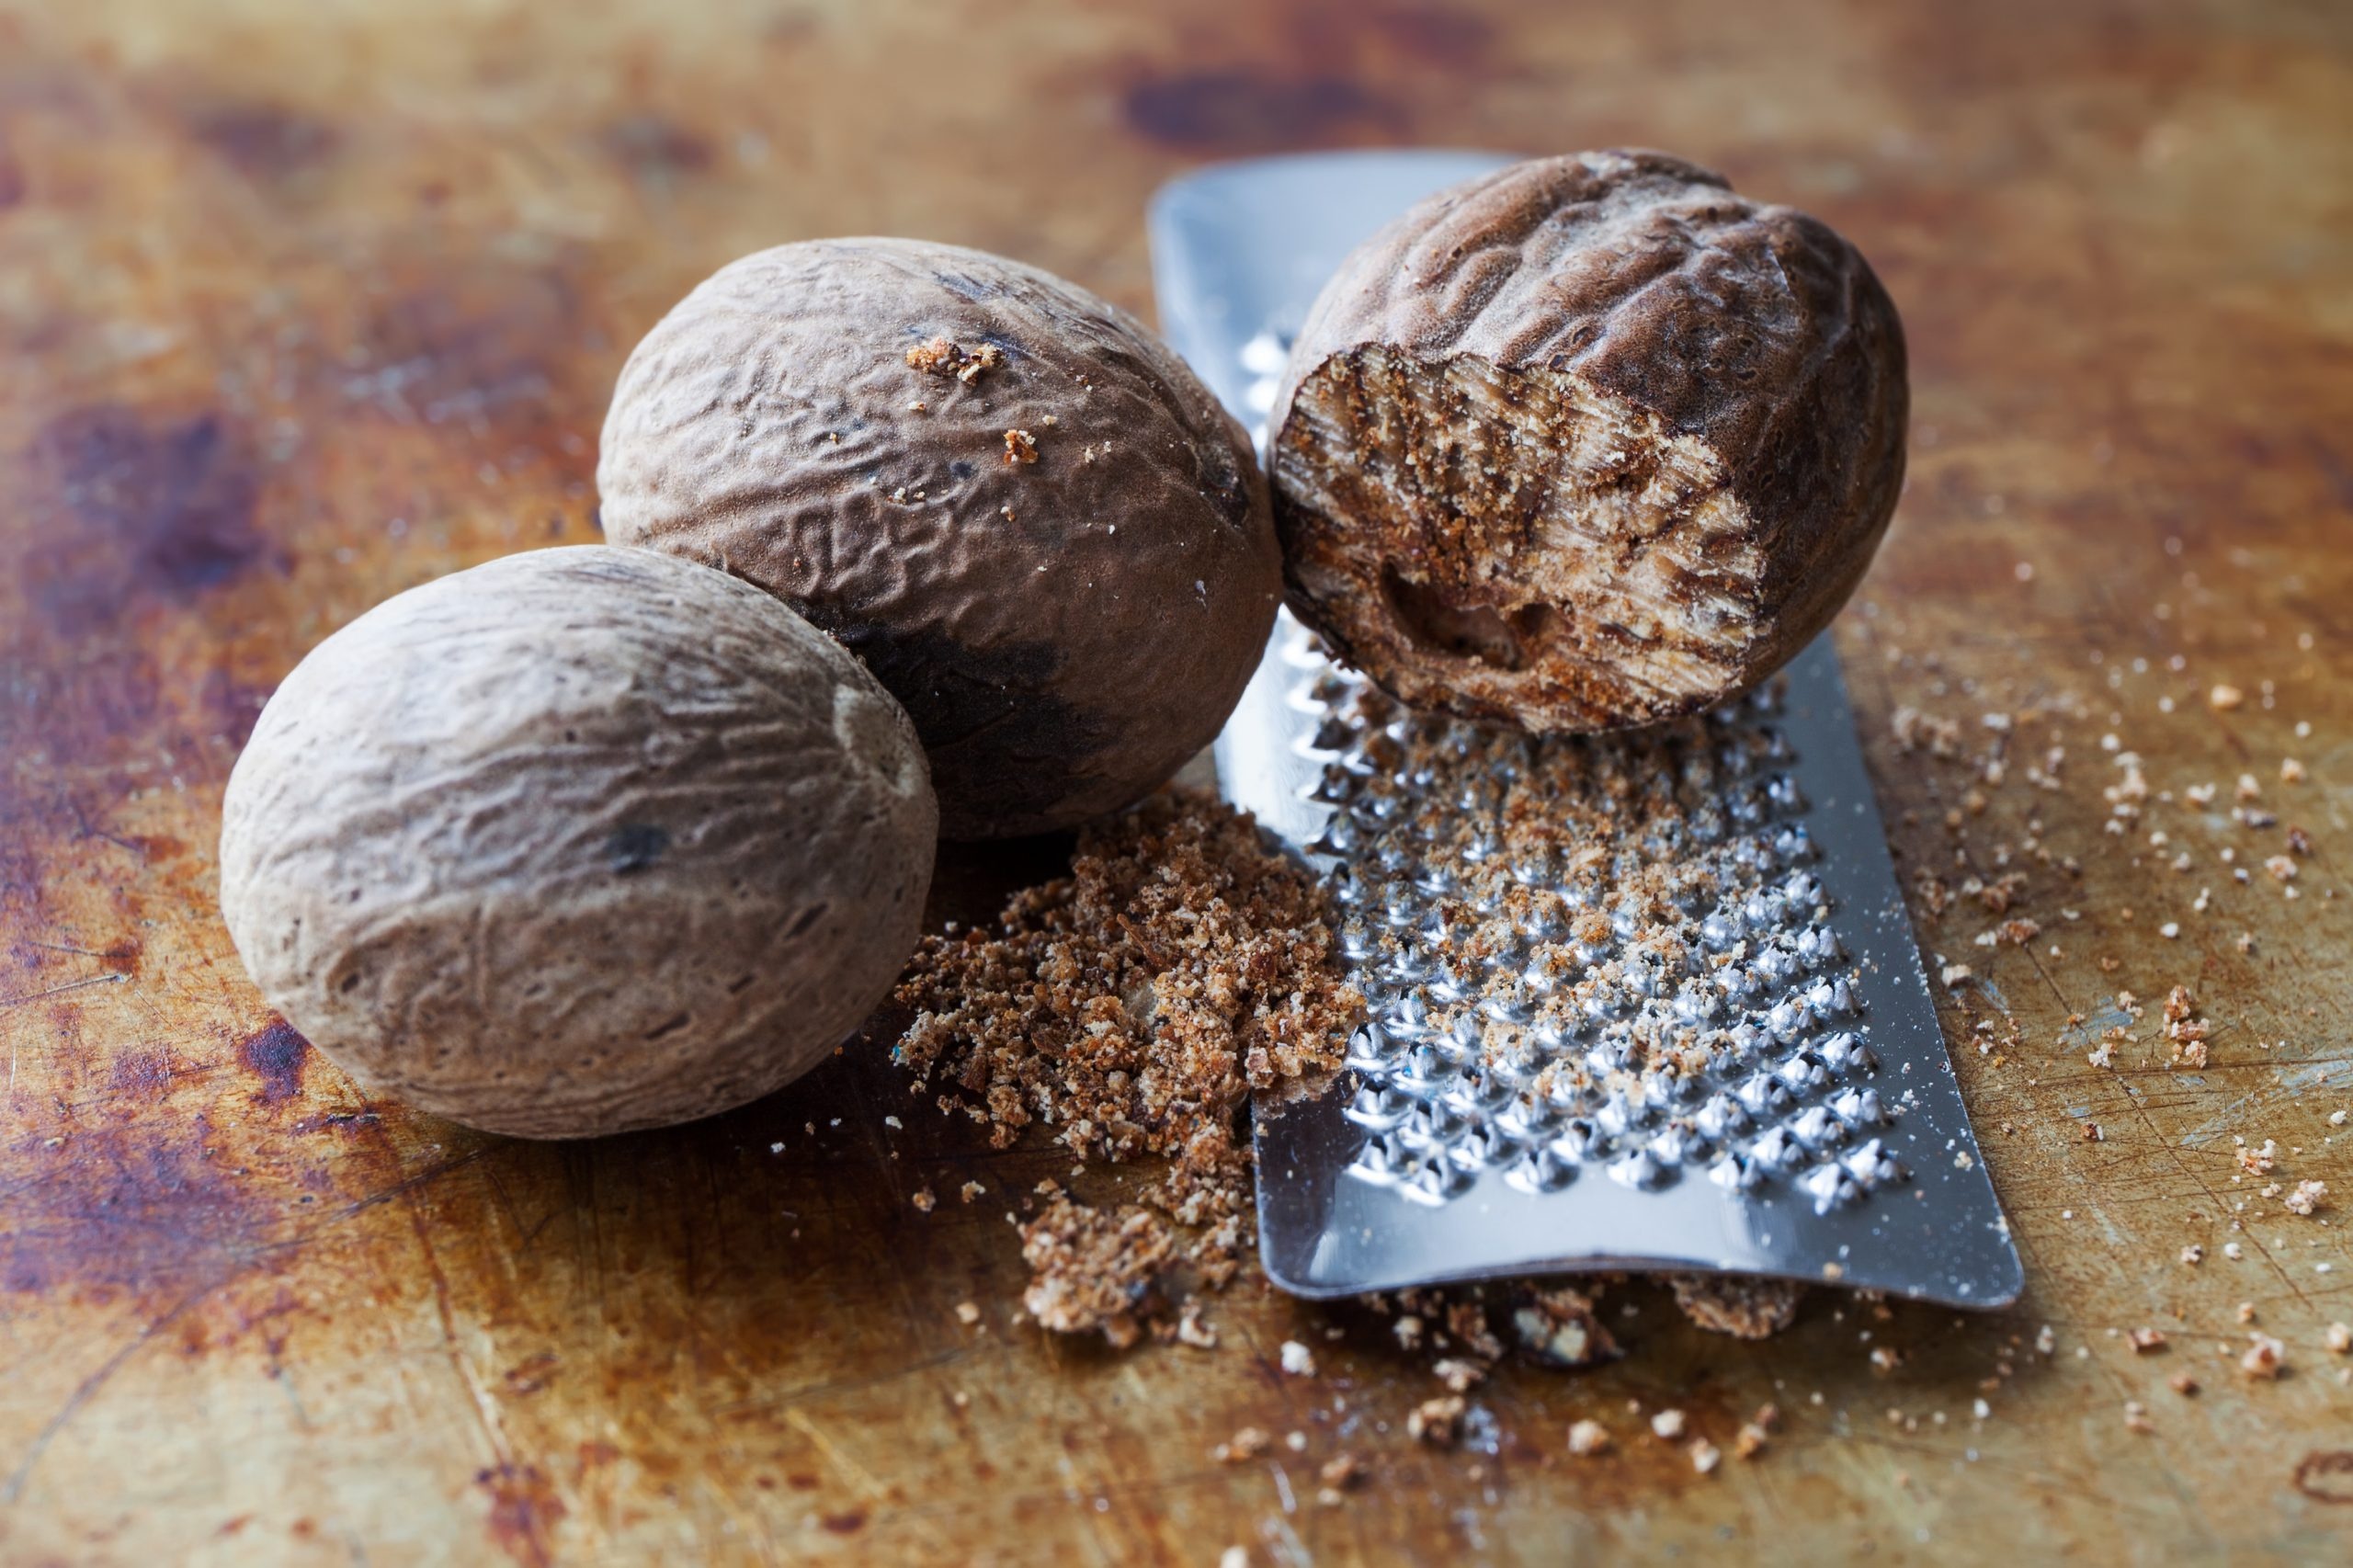 Nutmeg buying guide, Expert recommendations, Spice shopping made easy, Spice selection tips, 2560x1710 HD Desktop